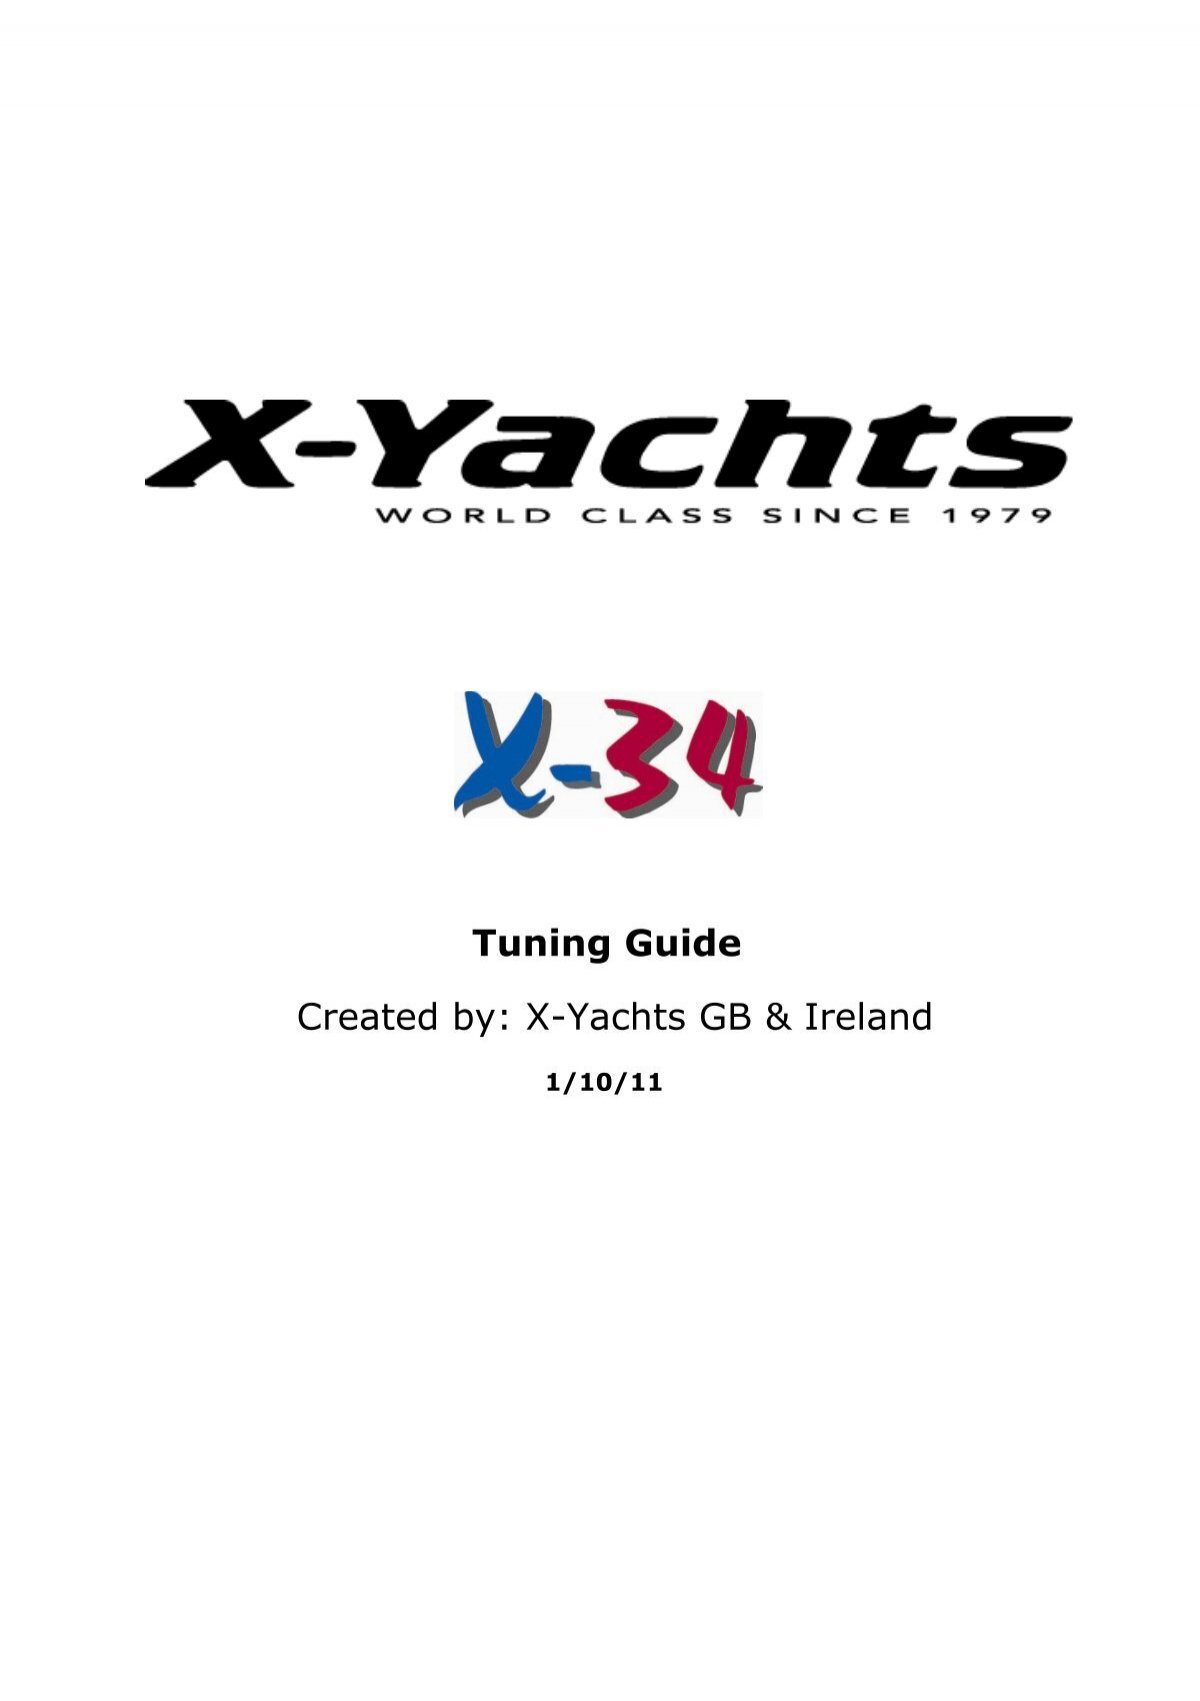 Tuning Guide Created by: X-Yachts GB & Ireland